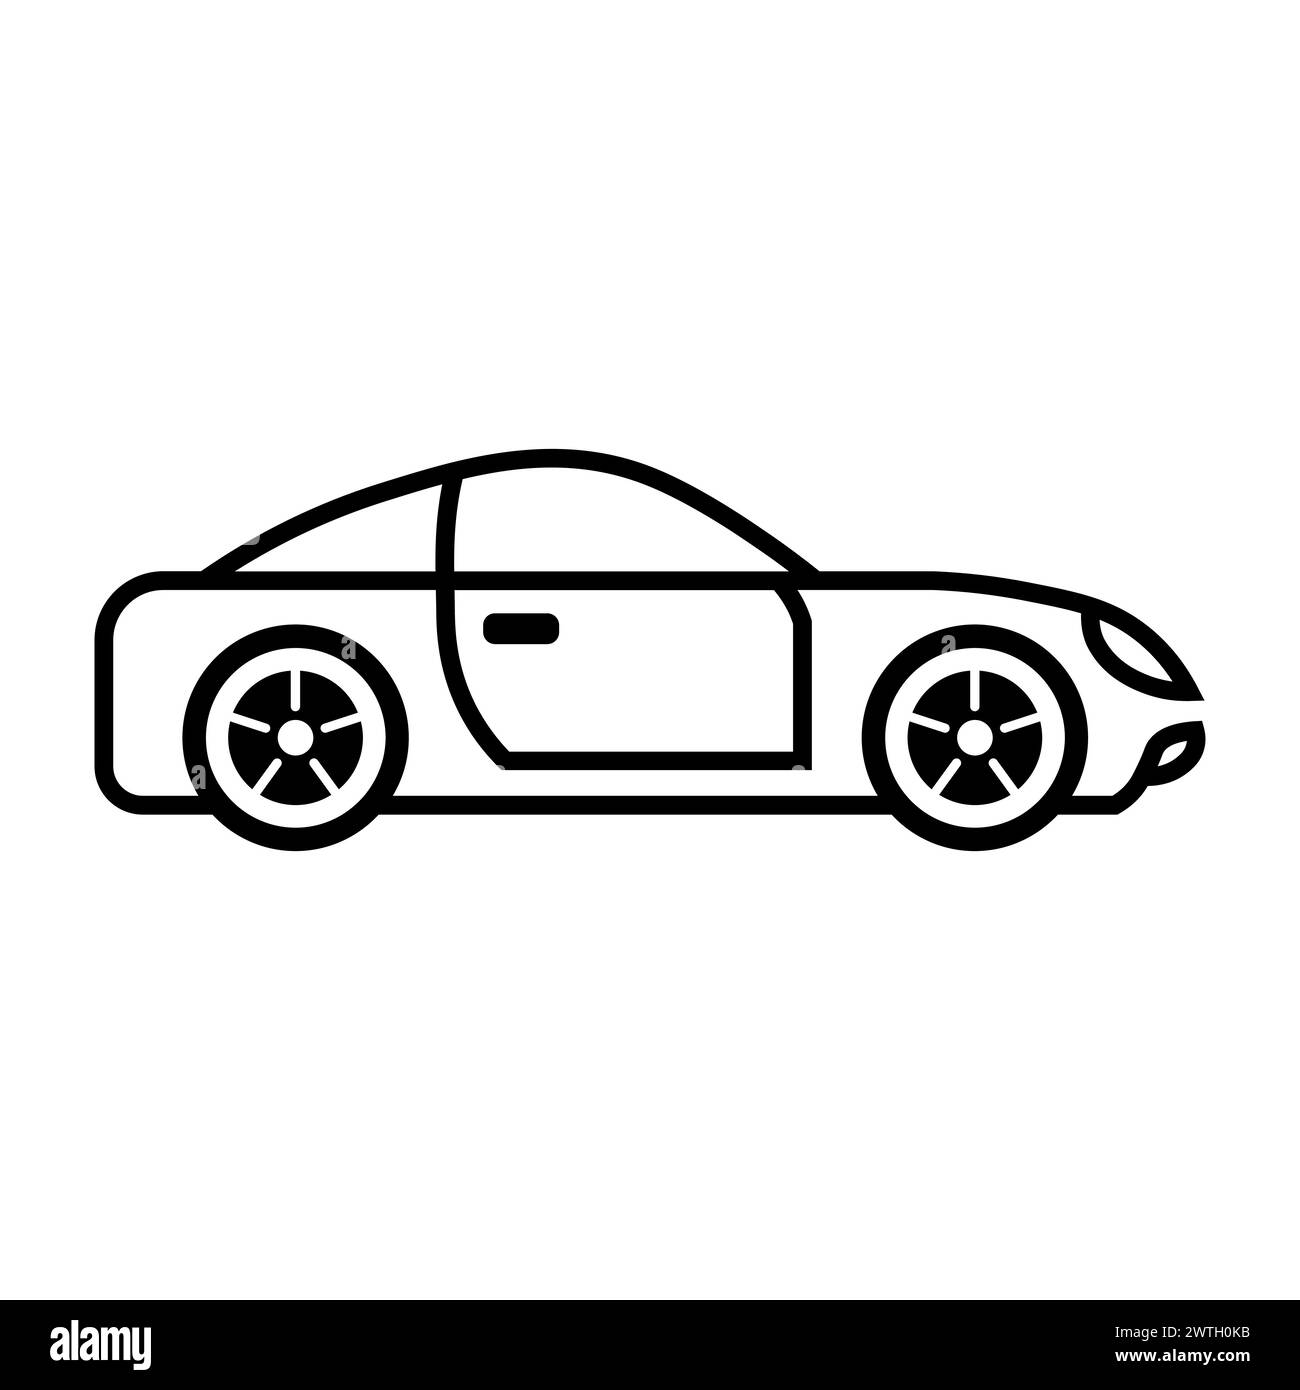 black vector sports car icon on white background Stock Vector